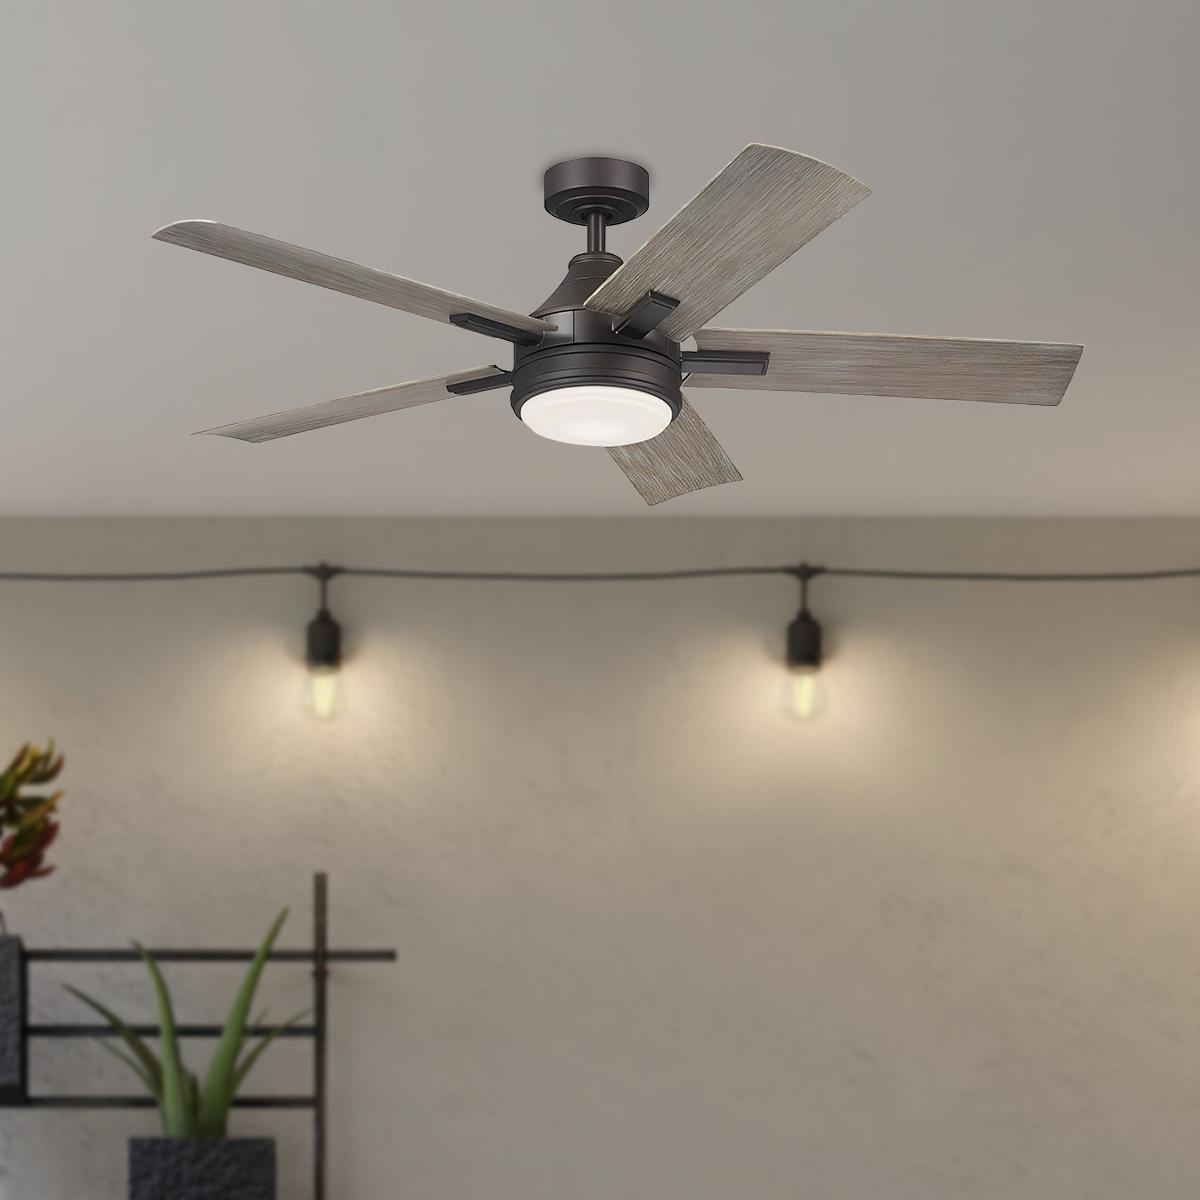 Tide 52 Inch Outdoor Ceiling Fan With Light And Remote, Marine Grade